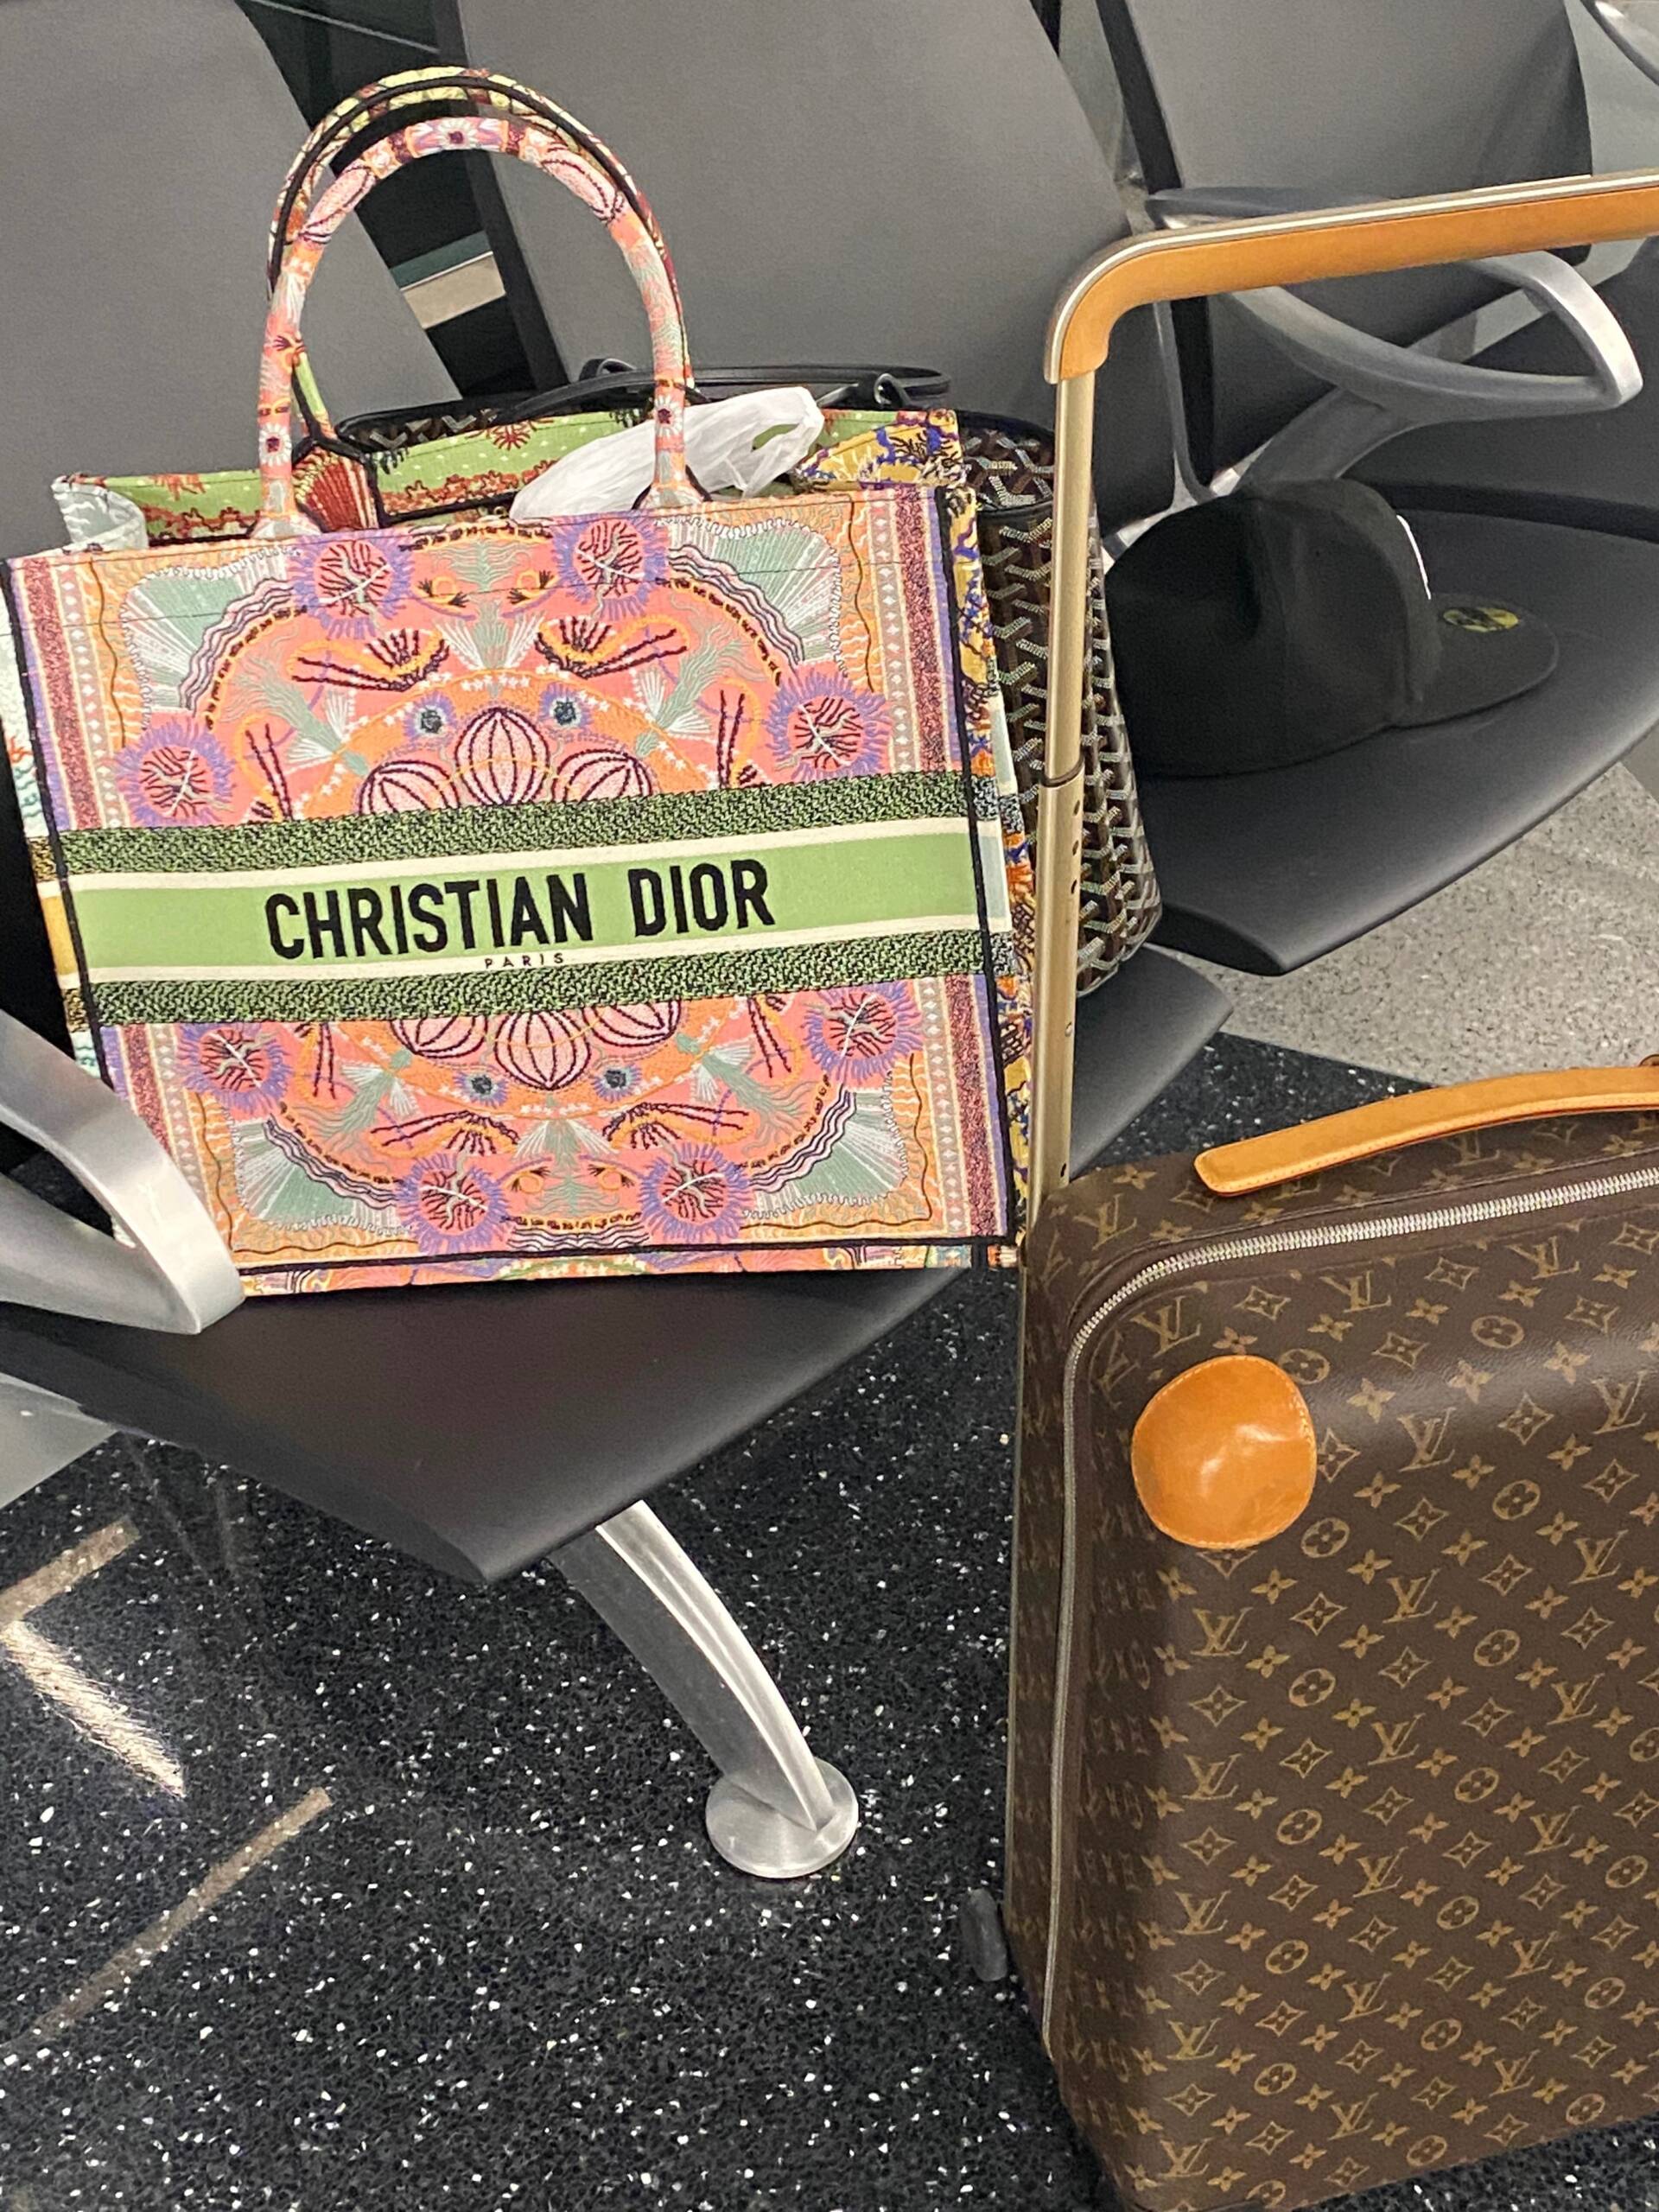 Review and Reveal of the Dior Book Tote